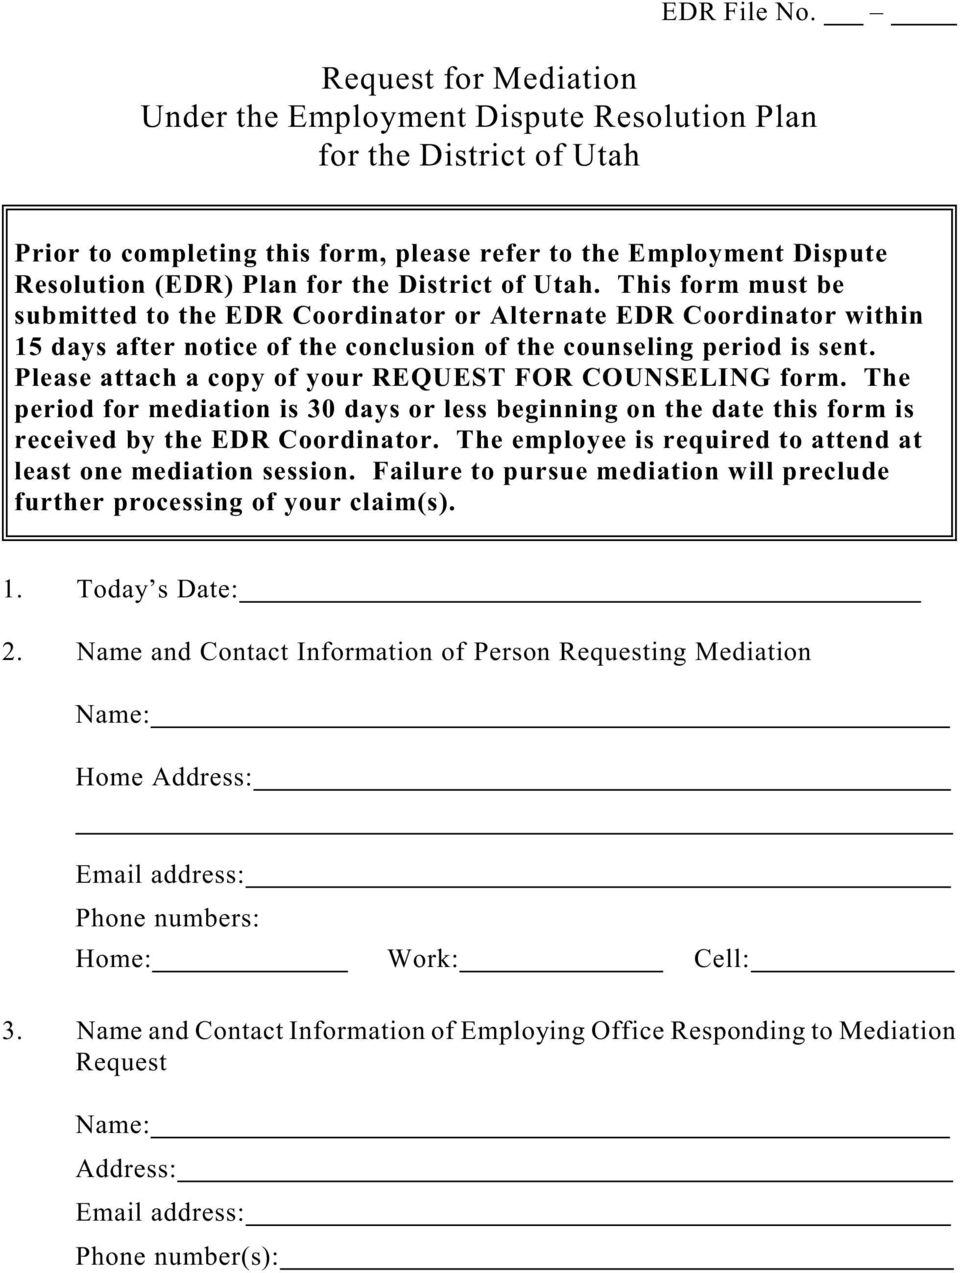 District of Utah. This form must be submitted to the EDR Coordinator or Alternate EDR Coordinator within 15 days after notice of the conclusion of the counseling period is sent.